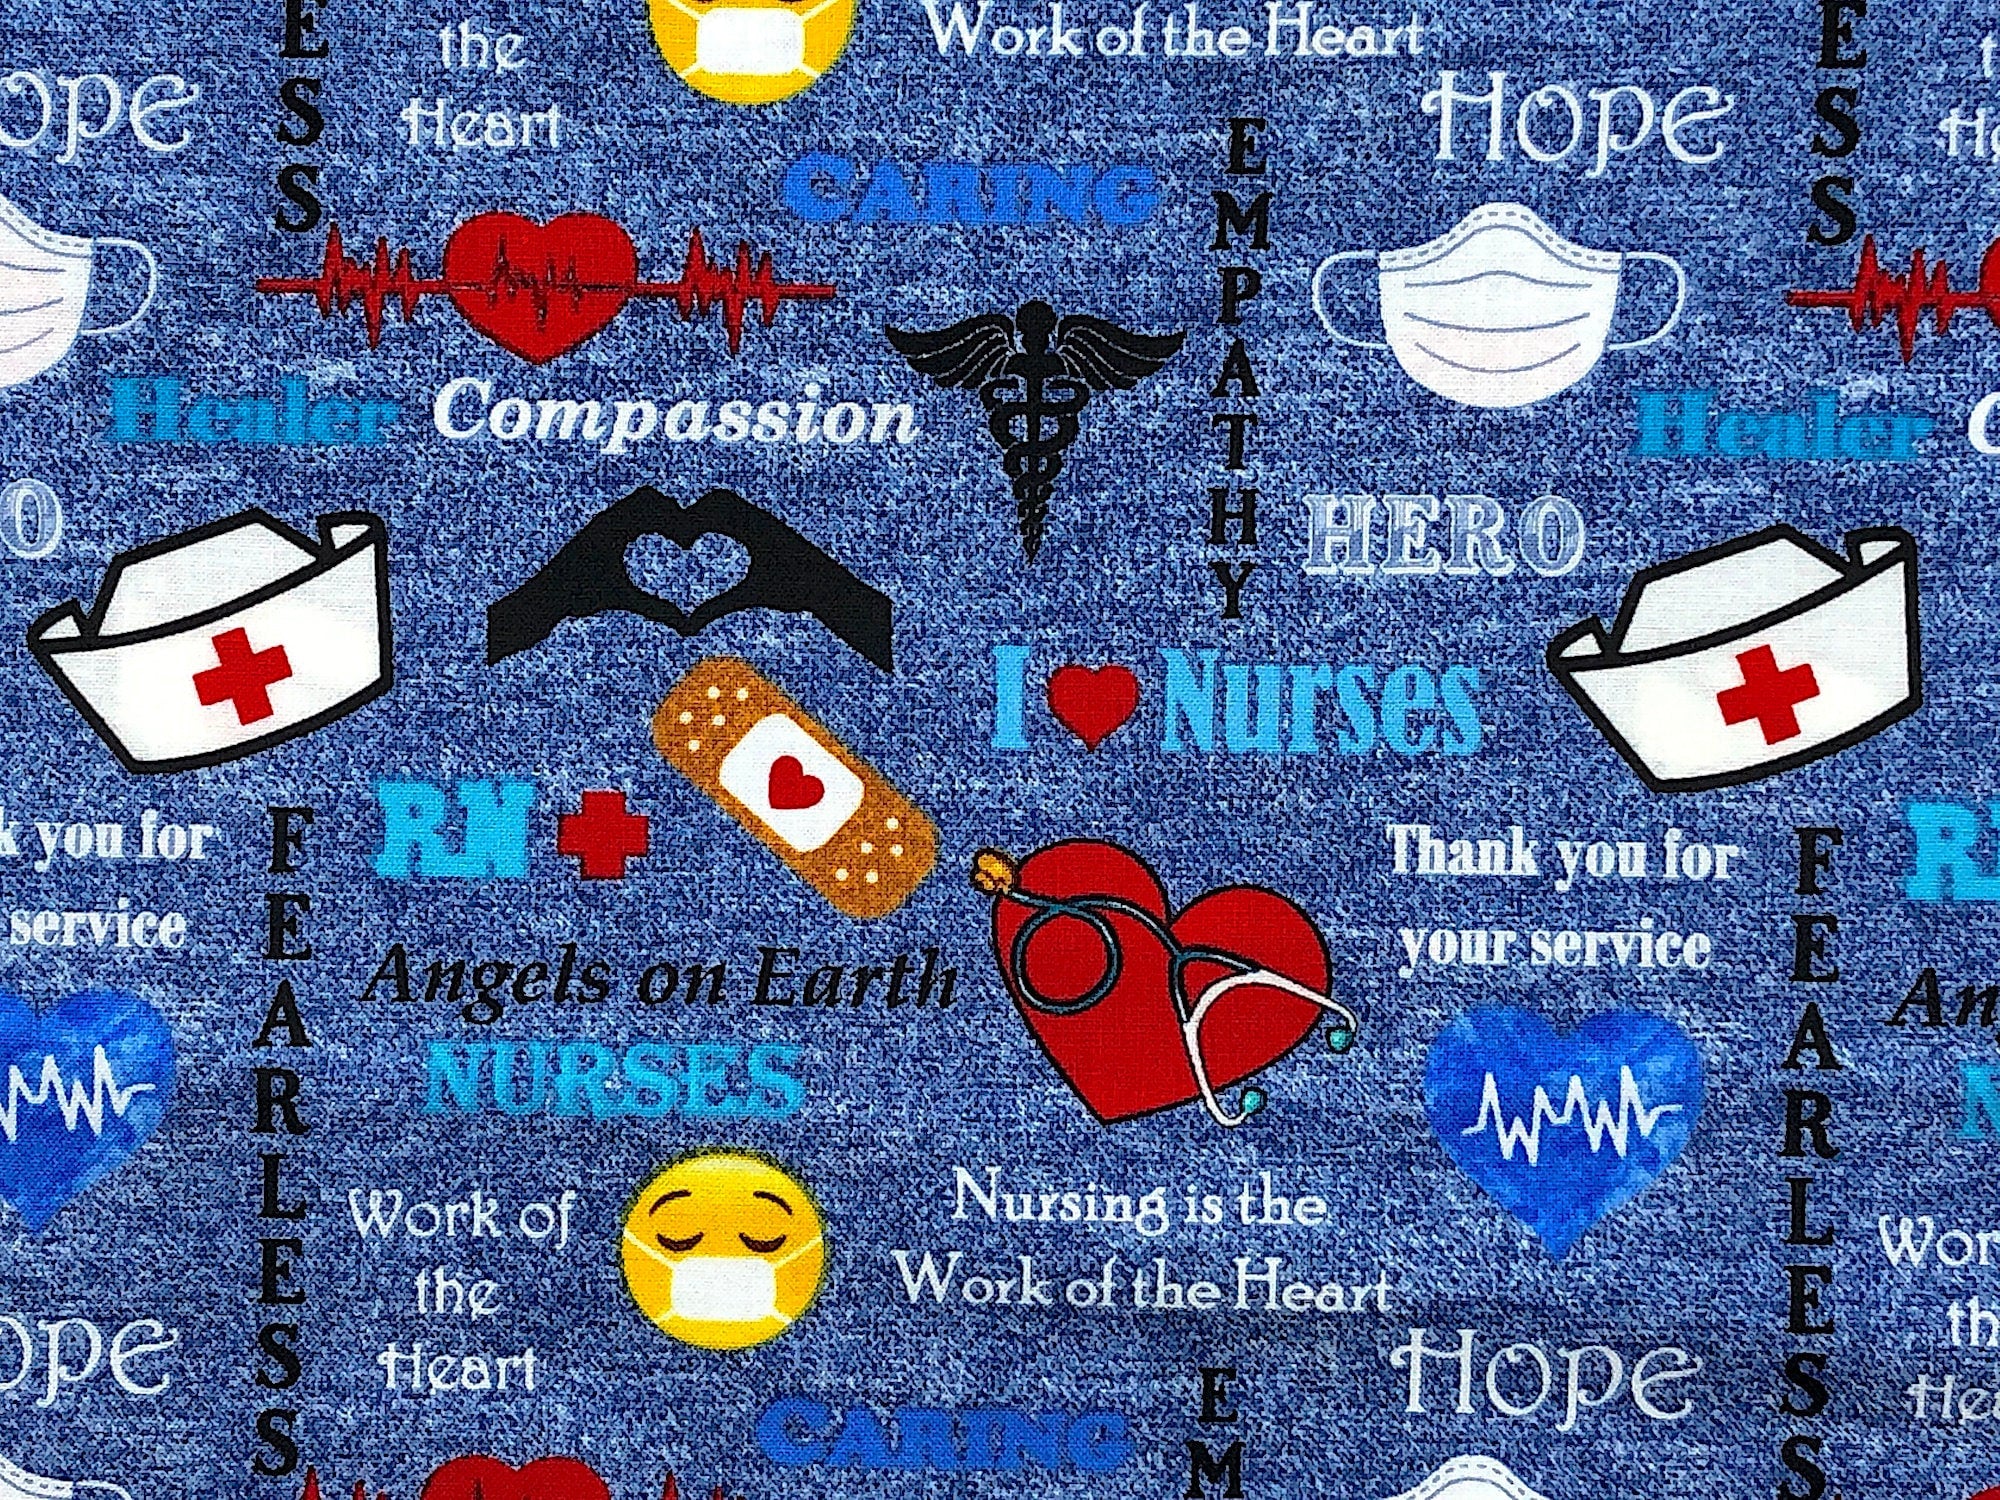 Close up of nurse sayings such as hero, healer, compassion, nursing is the work of the heart and more.